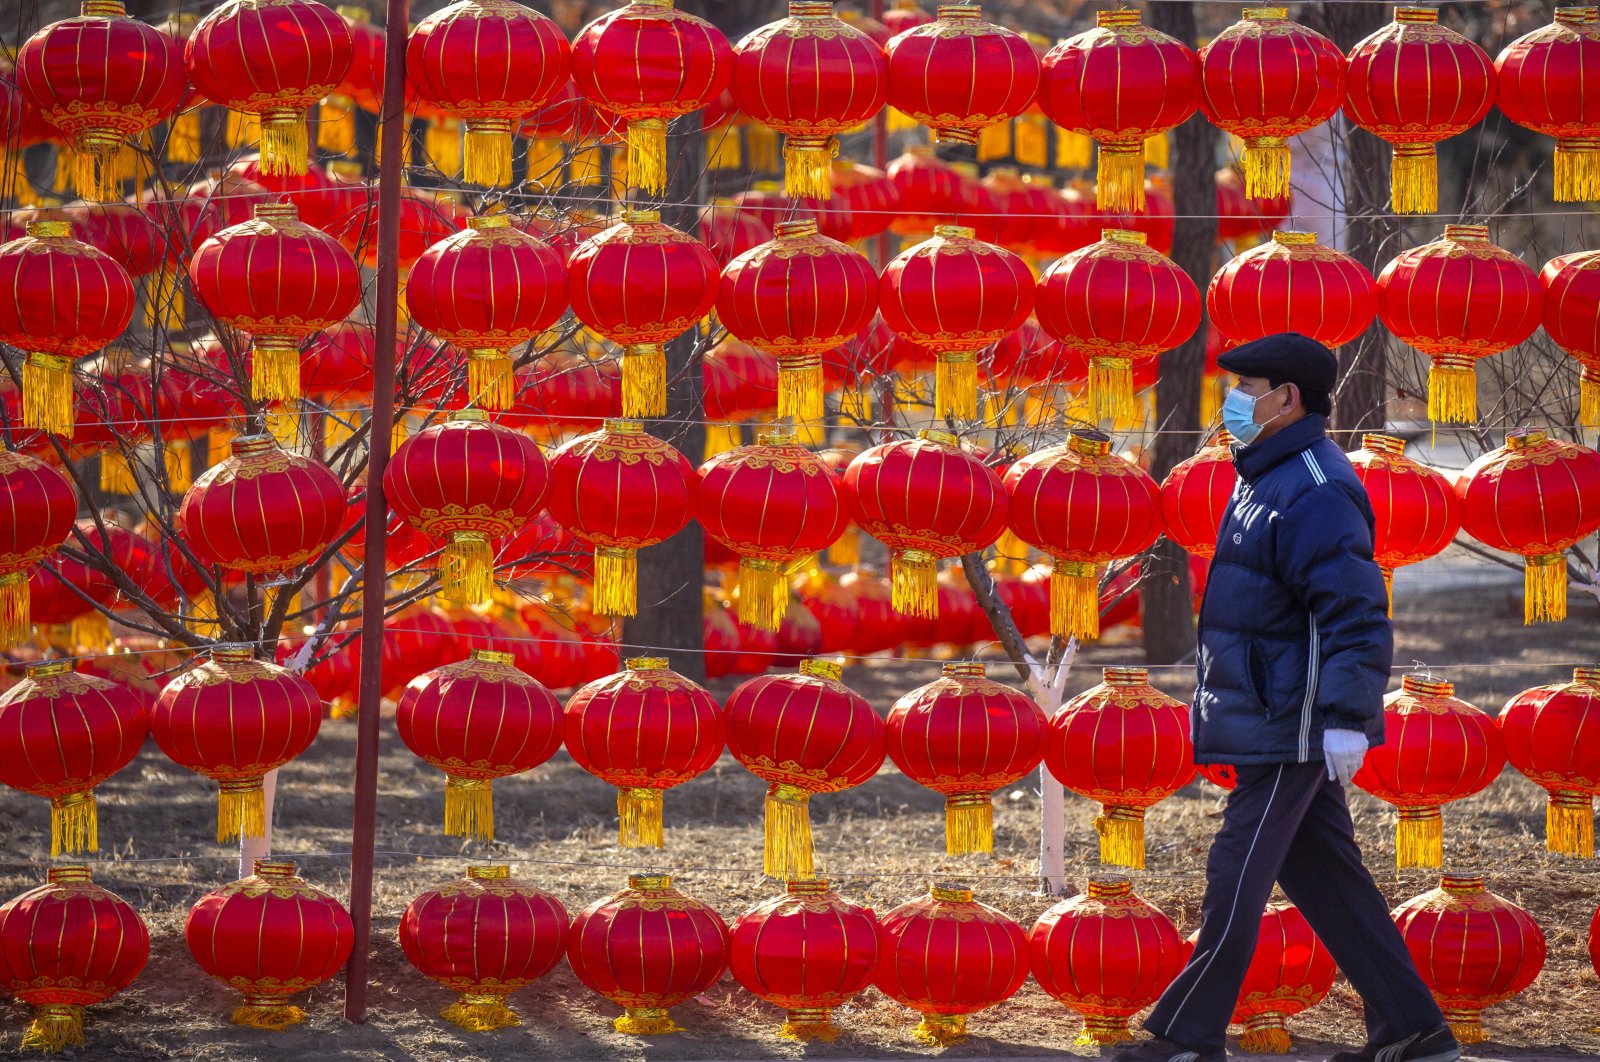 A man wearing a face mask to protect against the spread of the coronavirus walks past a display of lanterns at a public park in Beijing, Jan. 5, 2021. (AP Photo)